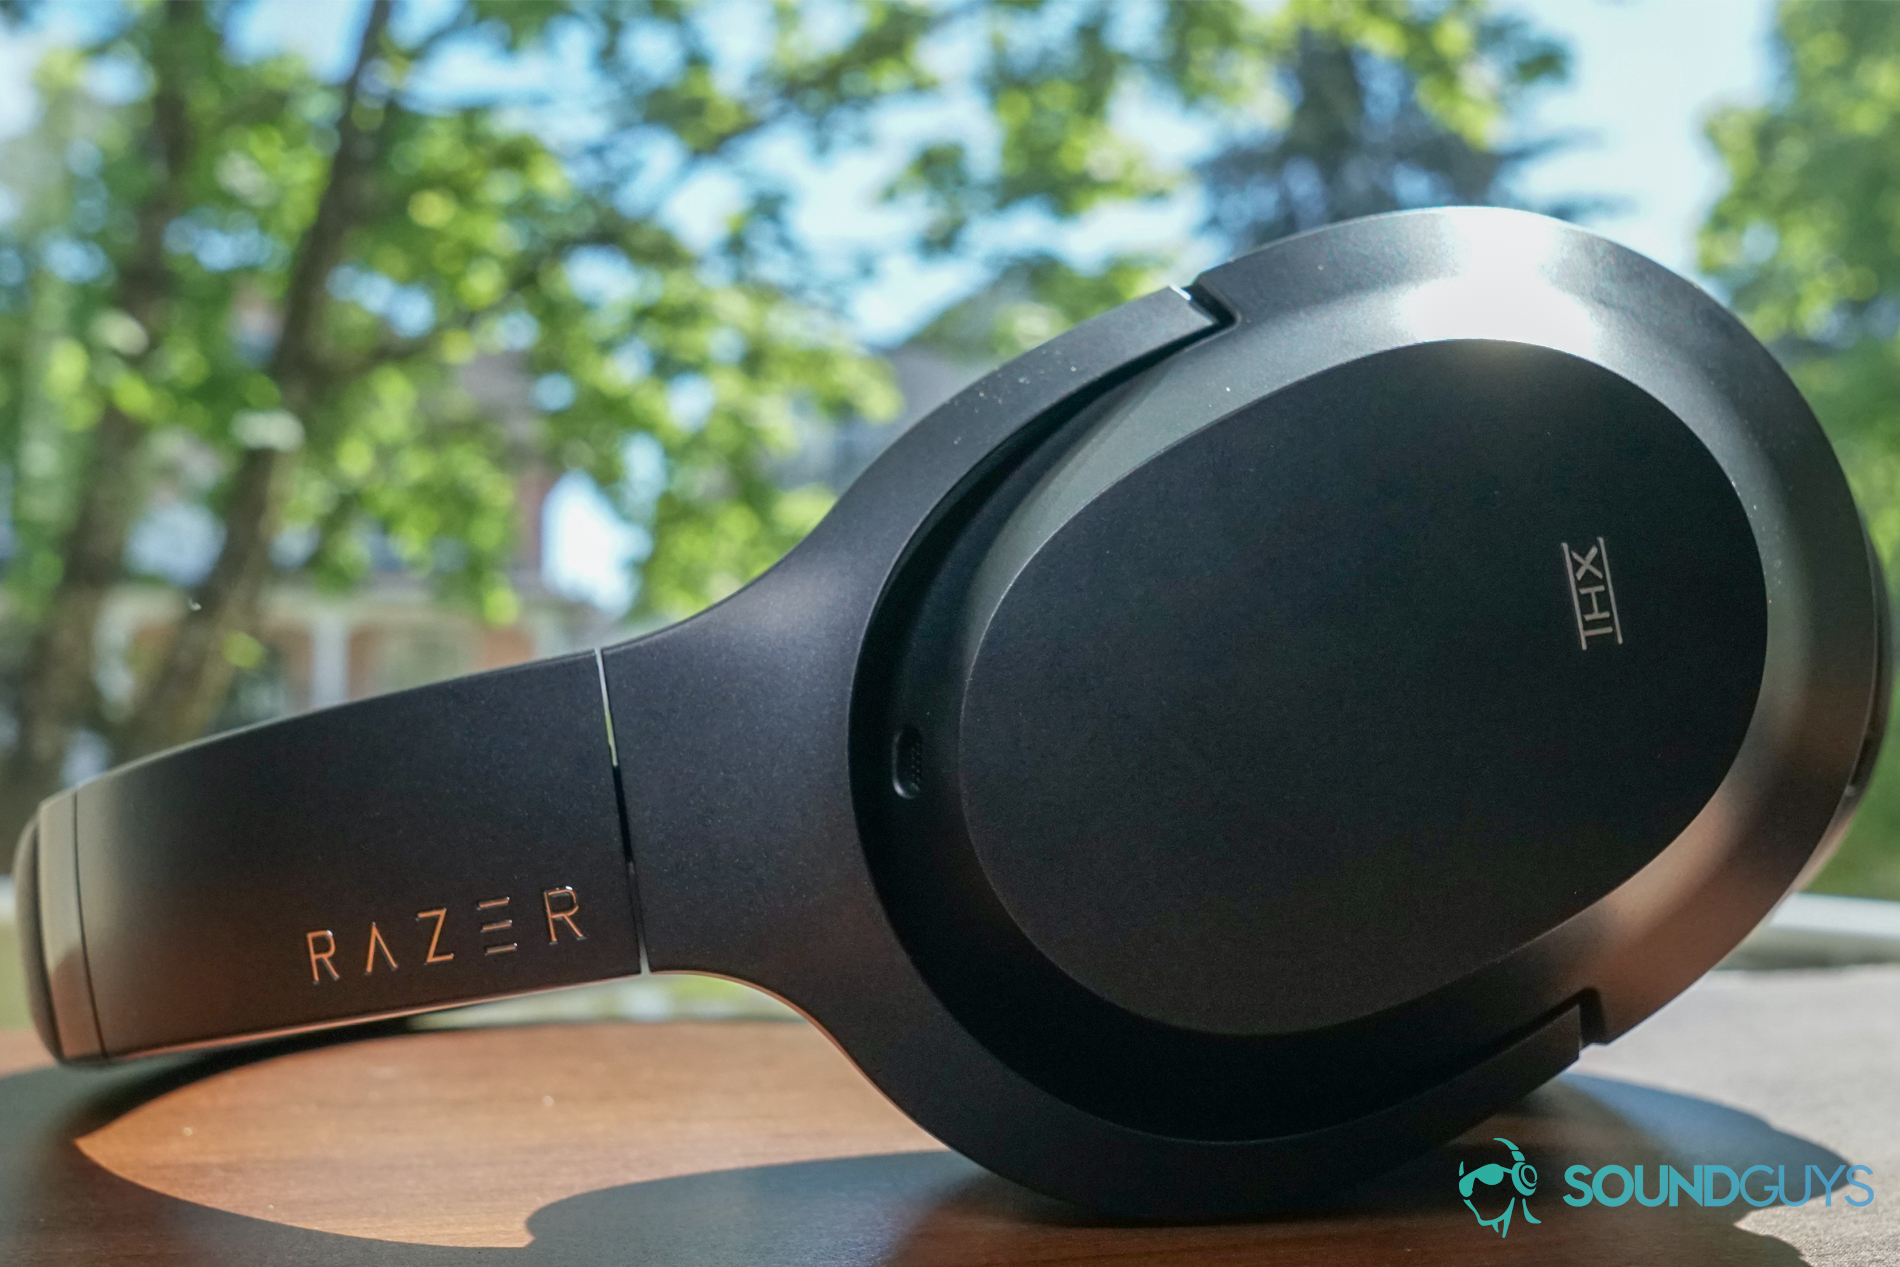 The Razer Opus lays on a wooden table by a window in the sun.